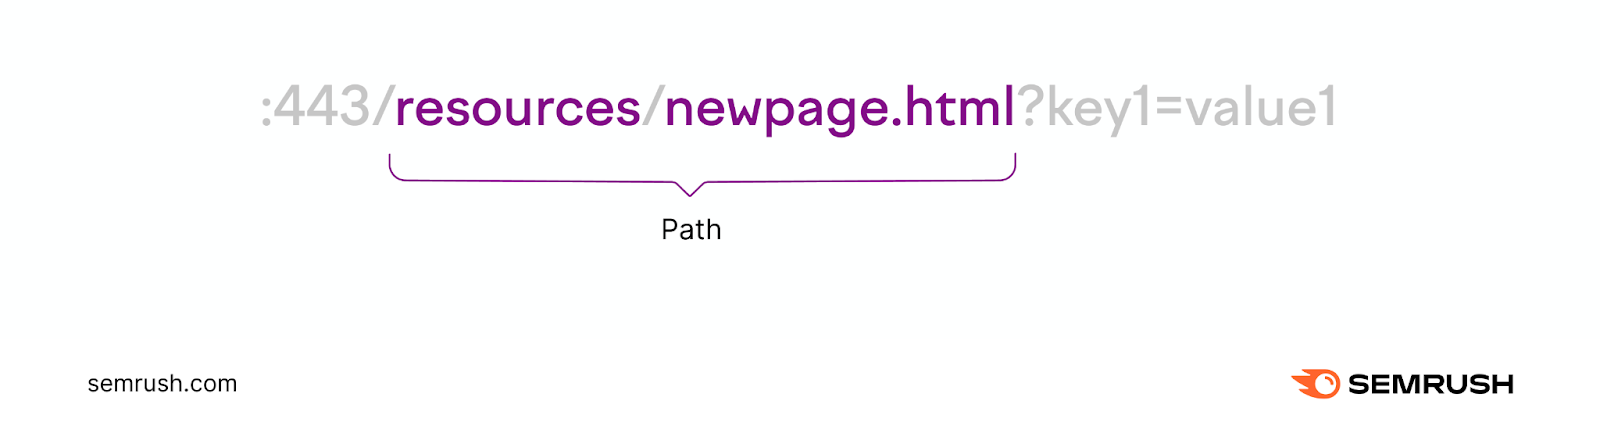 An URL with "resources/newpage.html" part marked as "path"